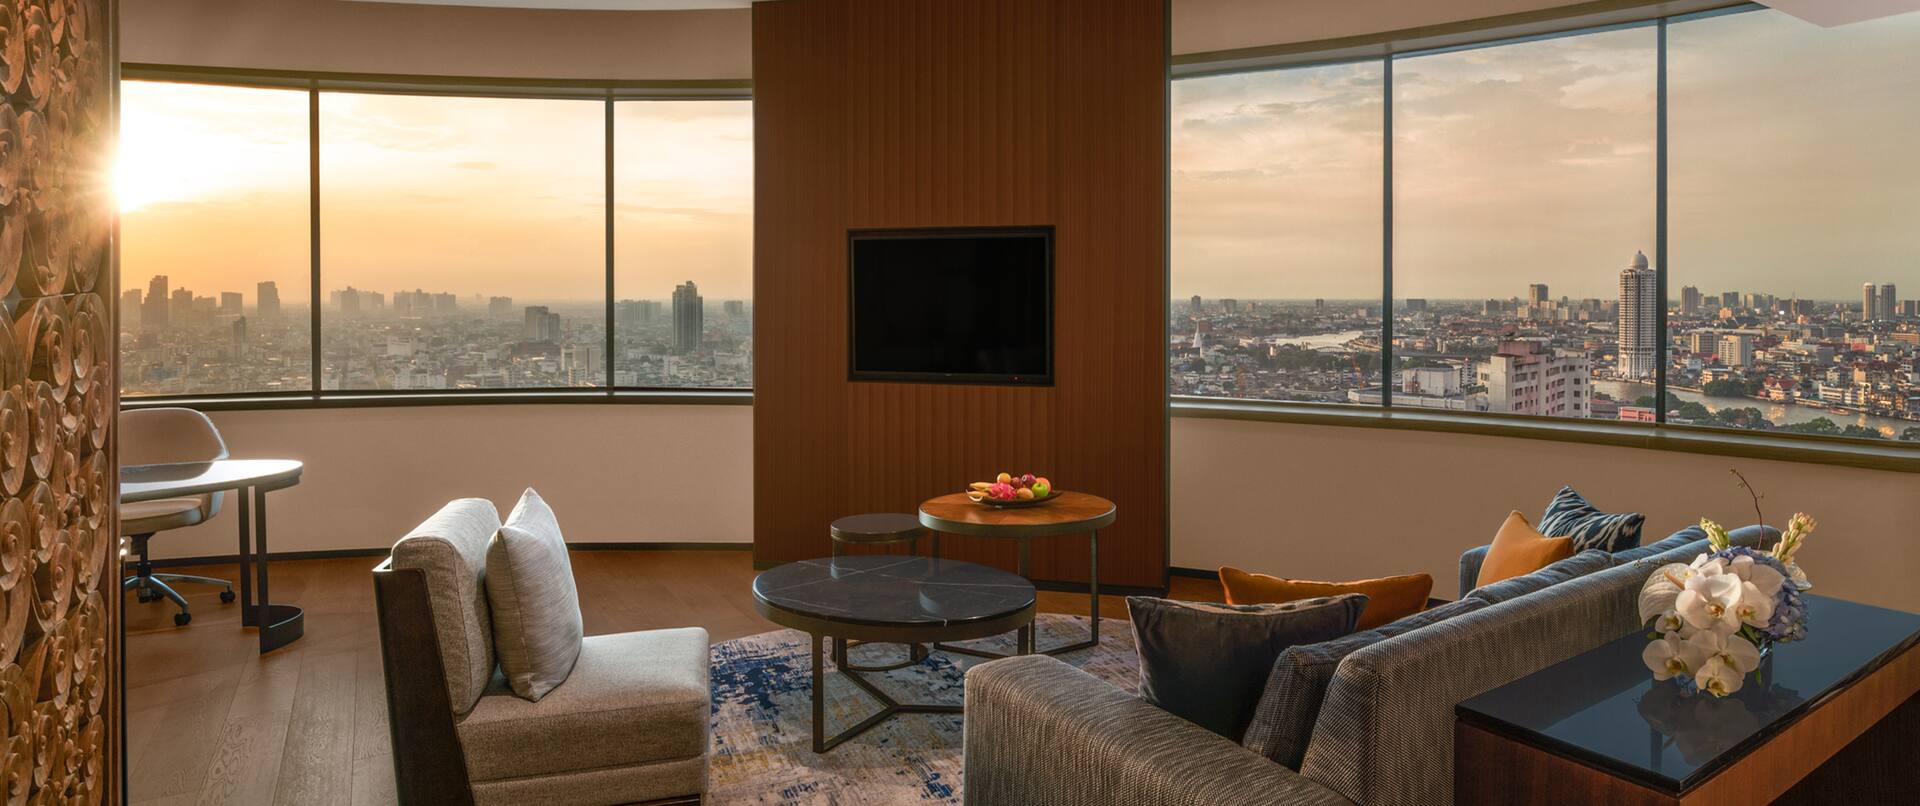 Family Suite Living Area with City View